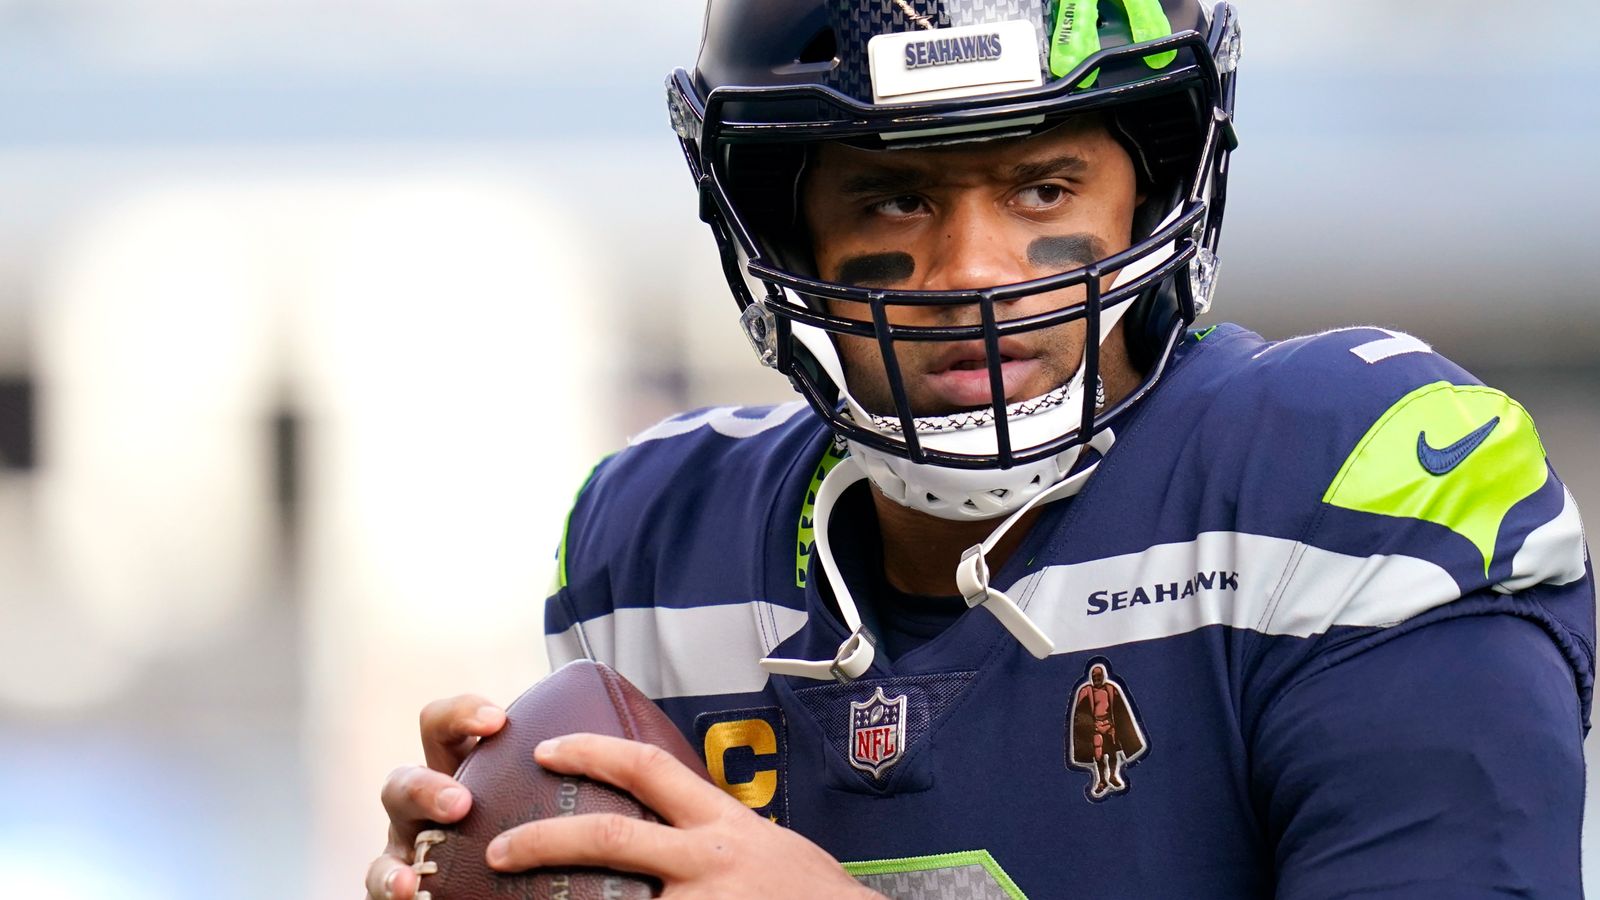 Seahawks quarterback Russell Wilson staying busy with philanthropic efforts